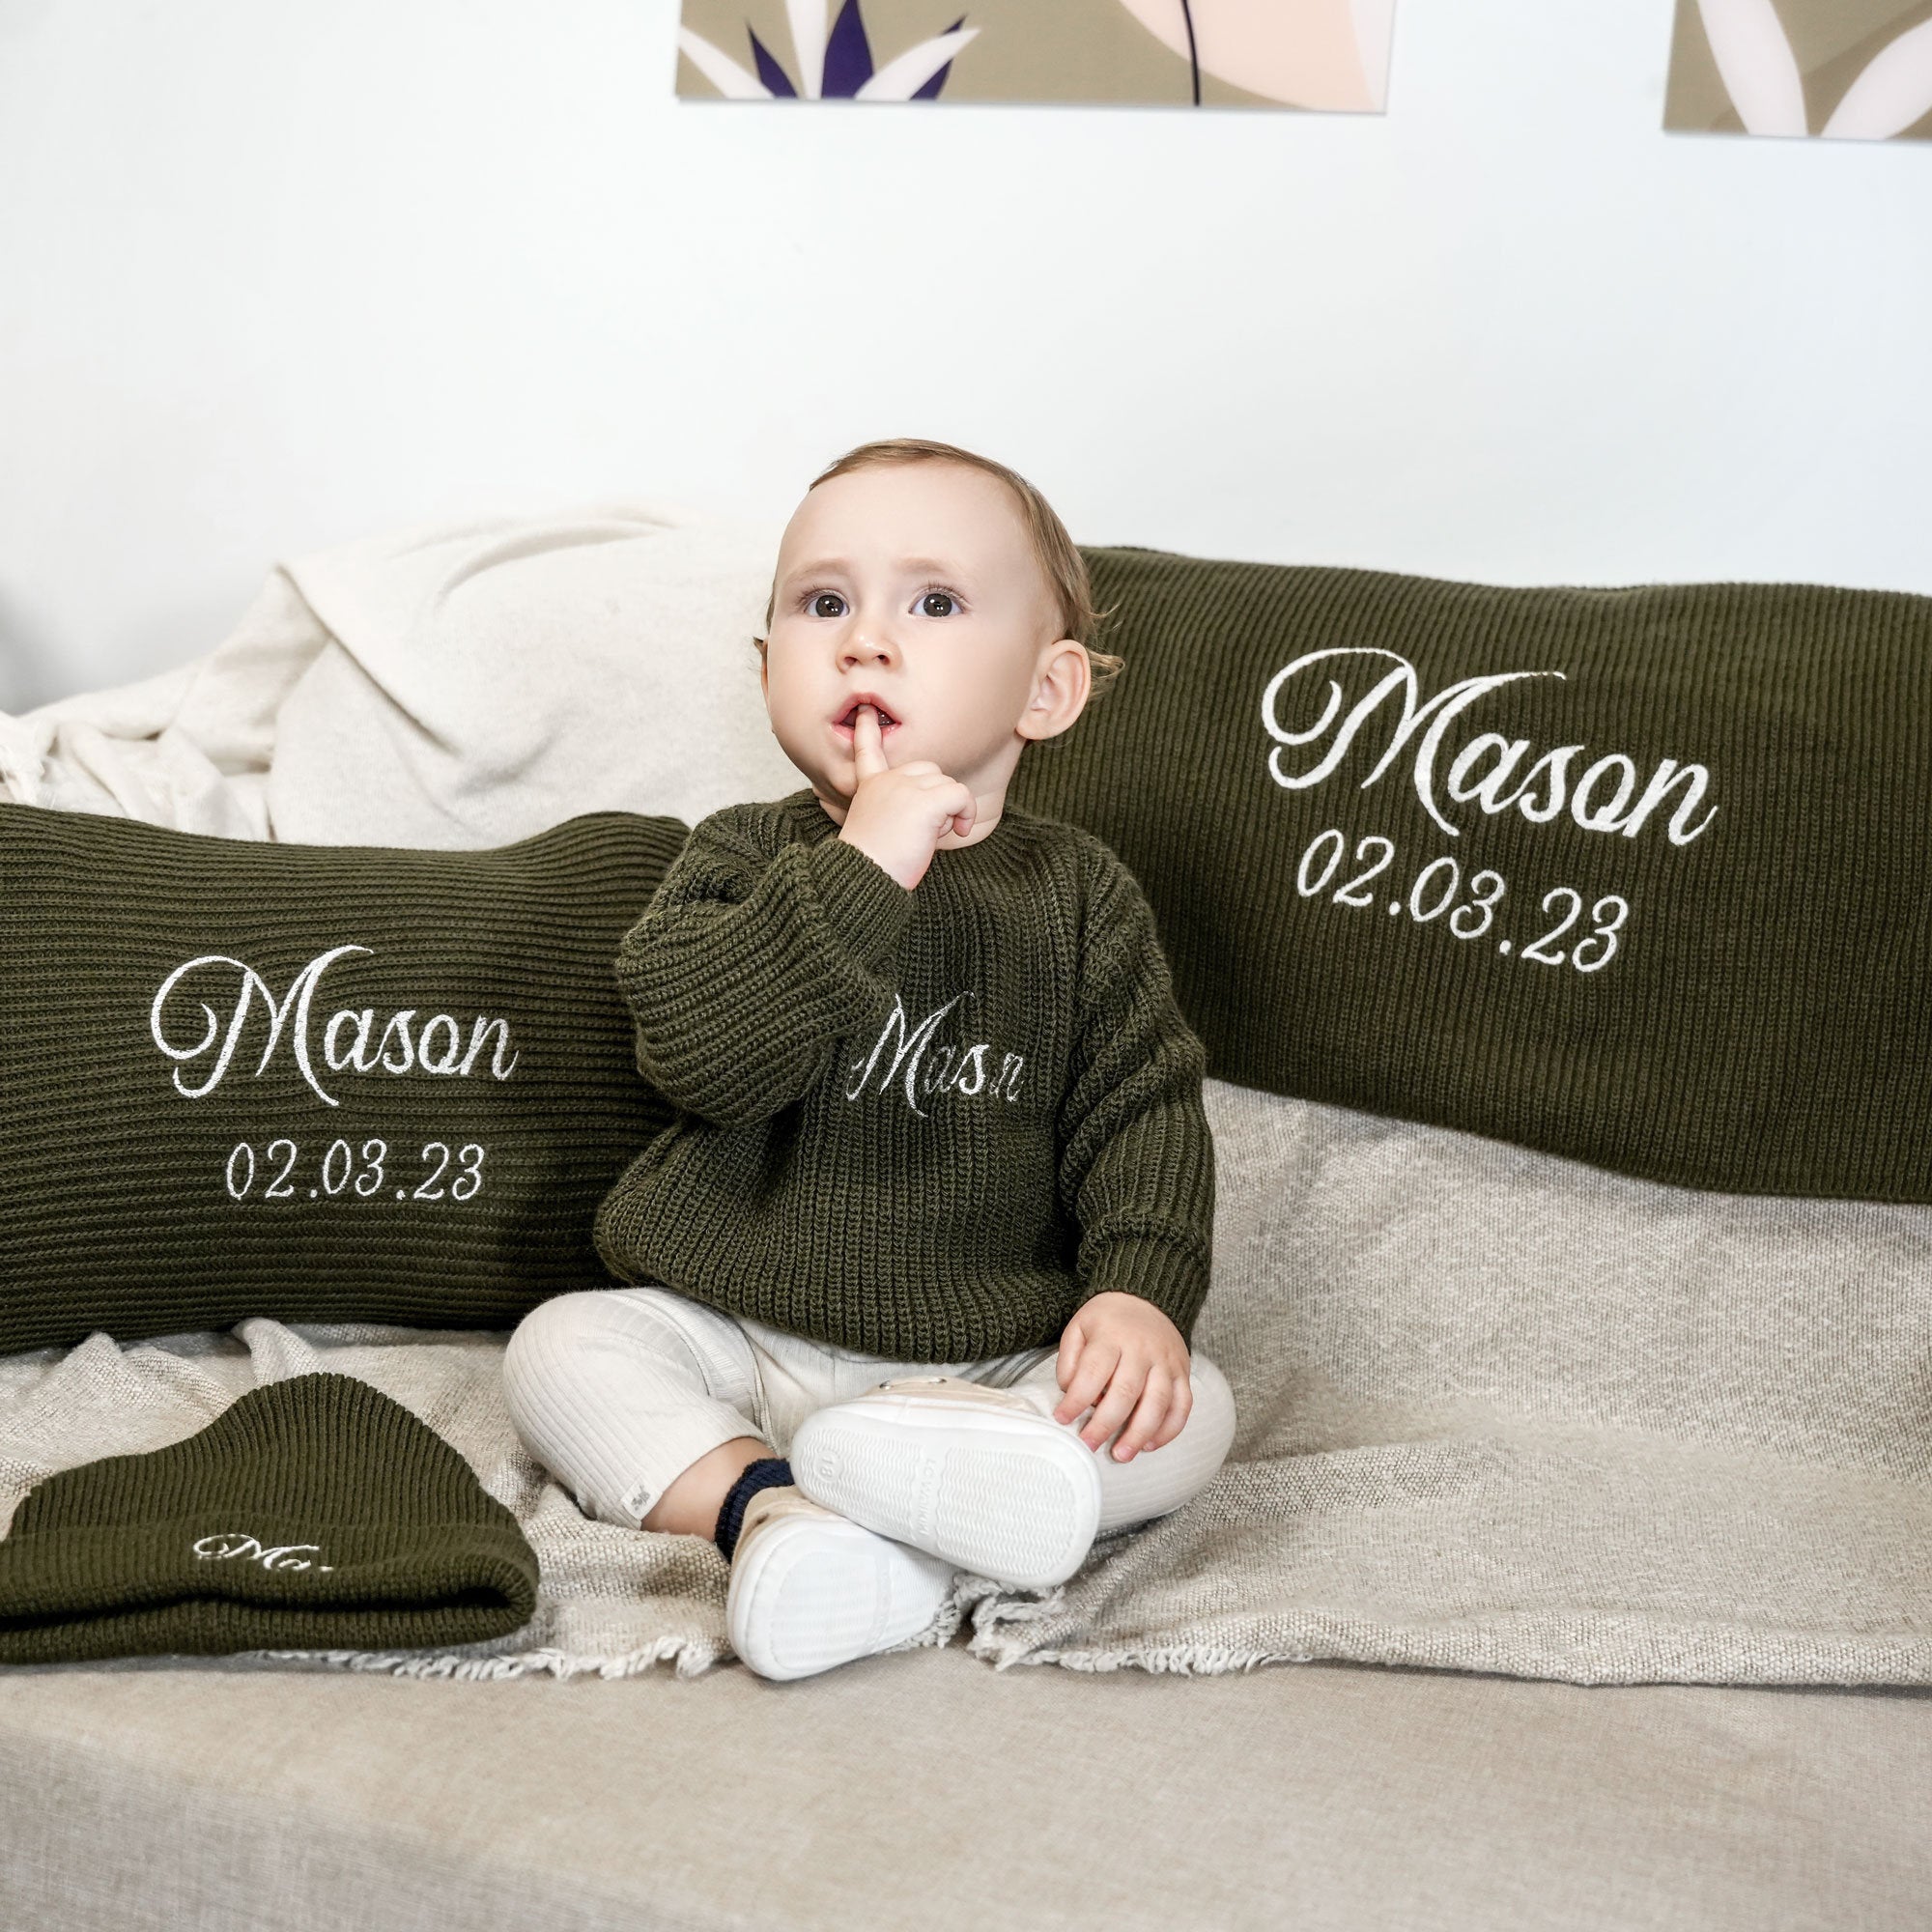 Personalized Baby Embroidered Beanie Sweater Set, Custom Baby Name Beanie, Baby Shower Gift, First Christmas Baby Gift Set, Newborn Gift, Pregnancy Gift